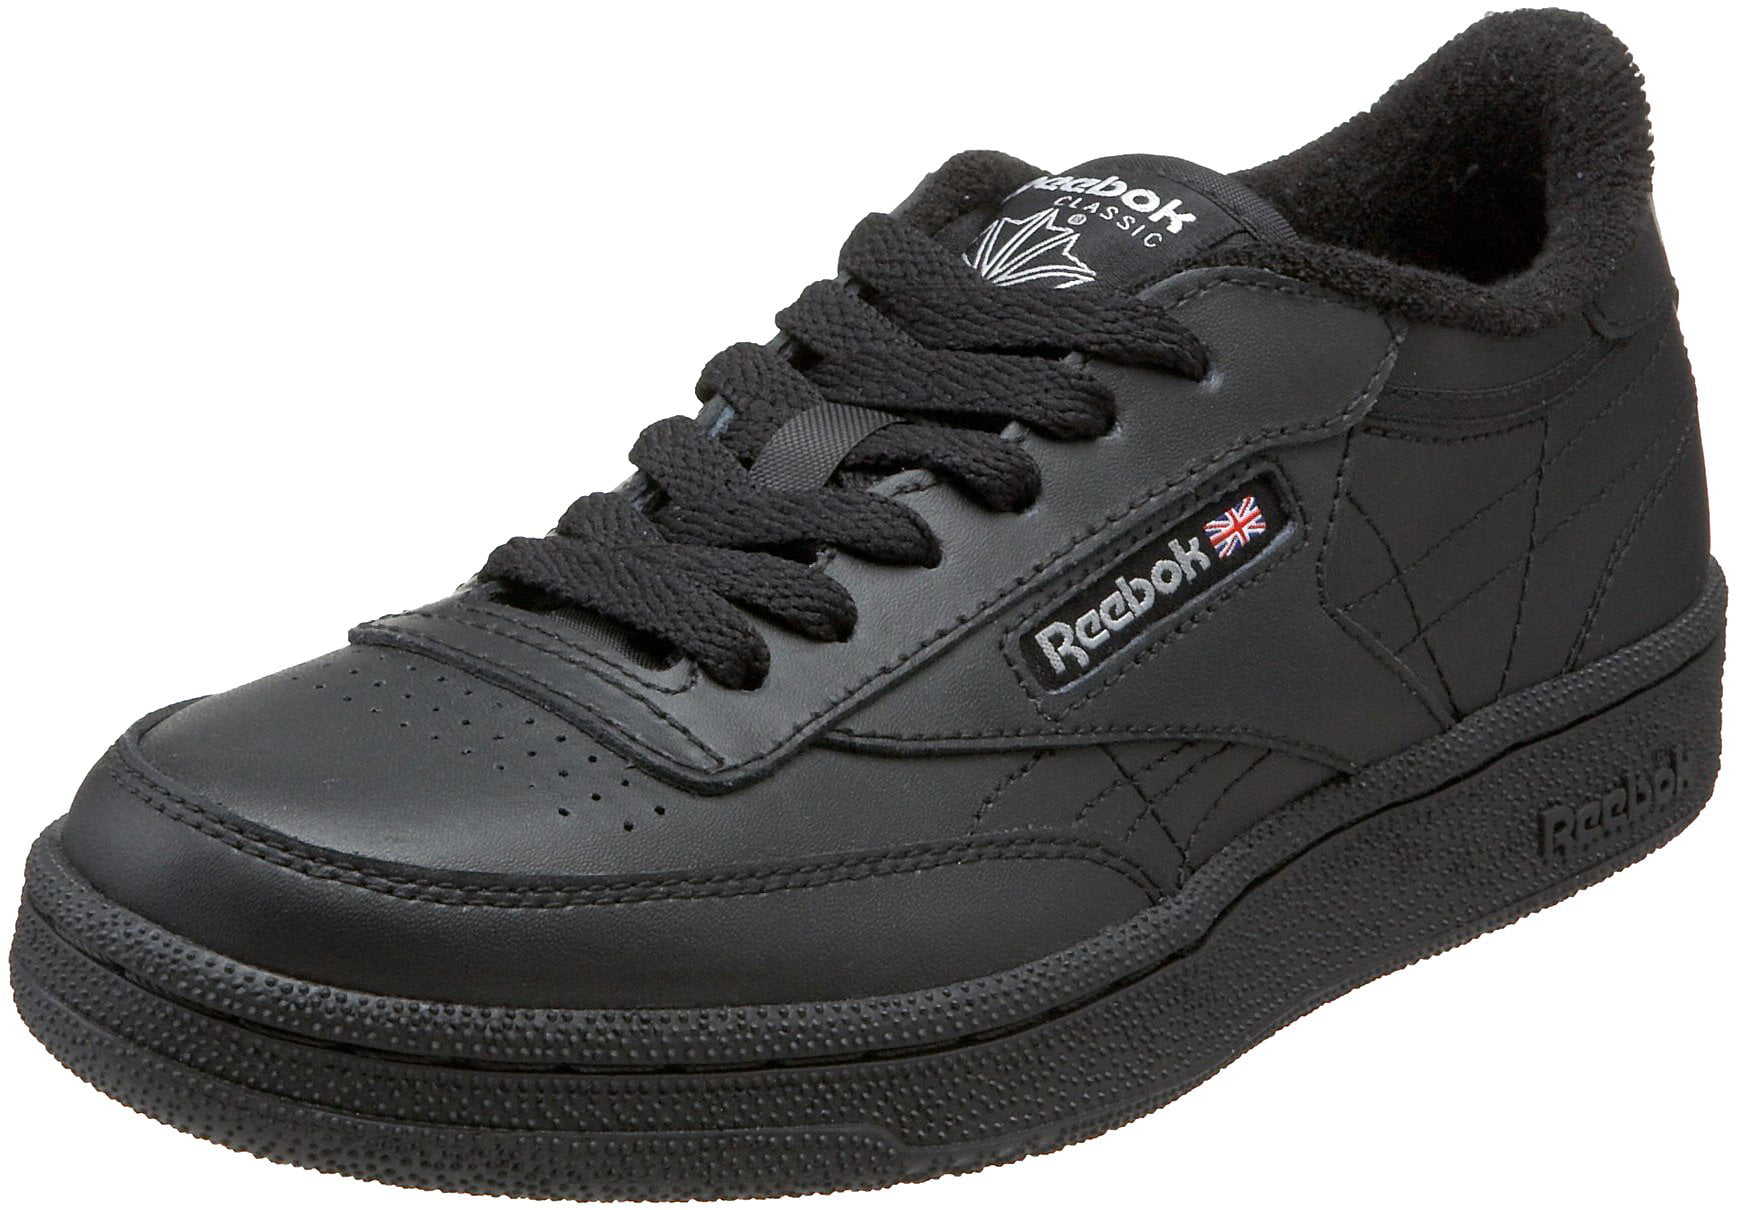 reebok classic leather 45 - 56% OFF 